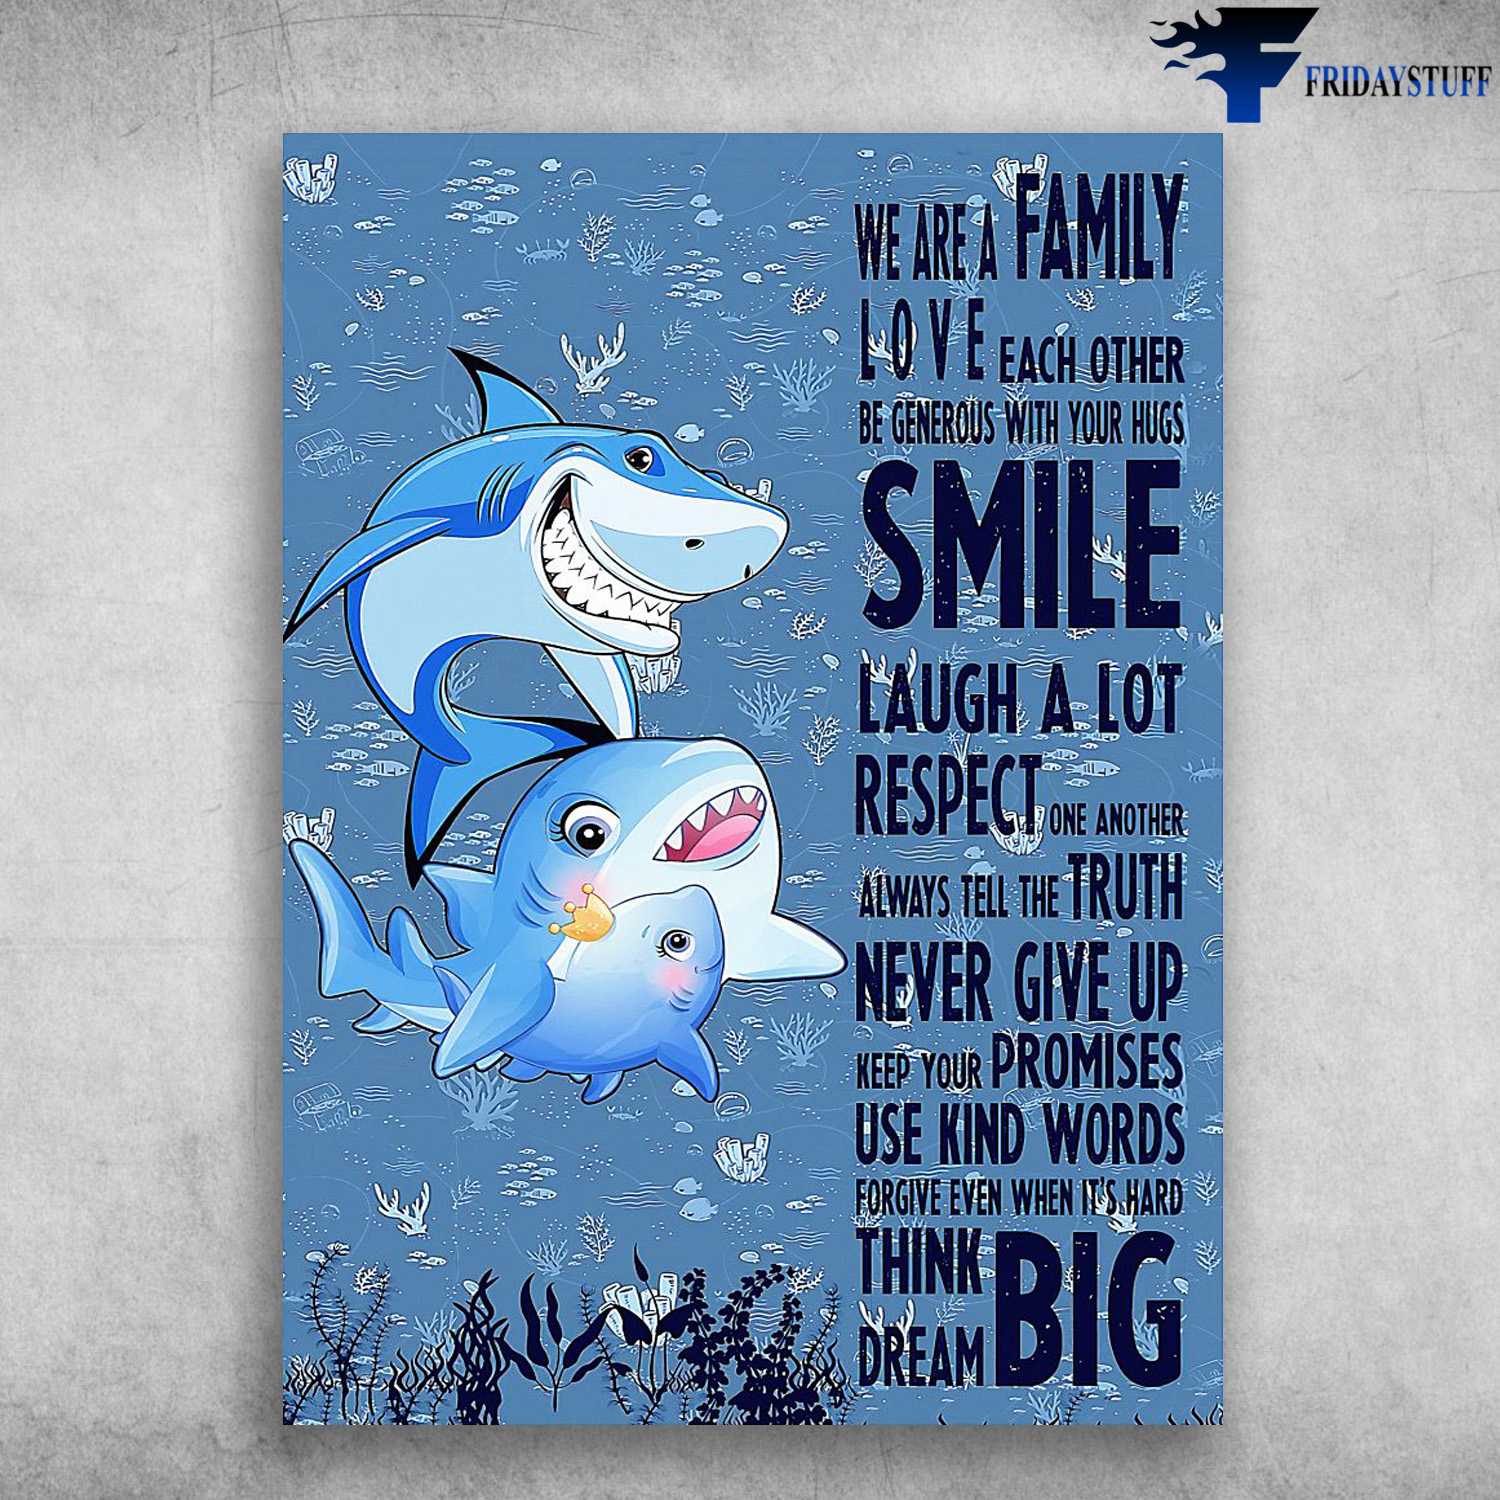 Shark Poster, Shark Family, We Are A Family Love Each Other, Be Generous With Your Hugs, Smile Laugh A Lot Respect, One Another Always Tell The True, Never Give Up, Keep Your Promises